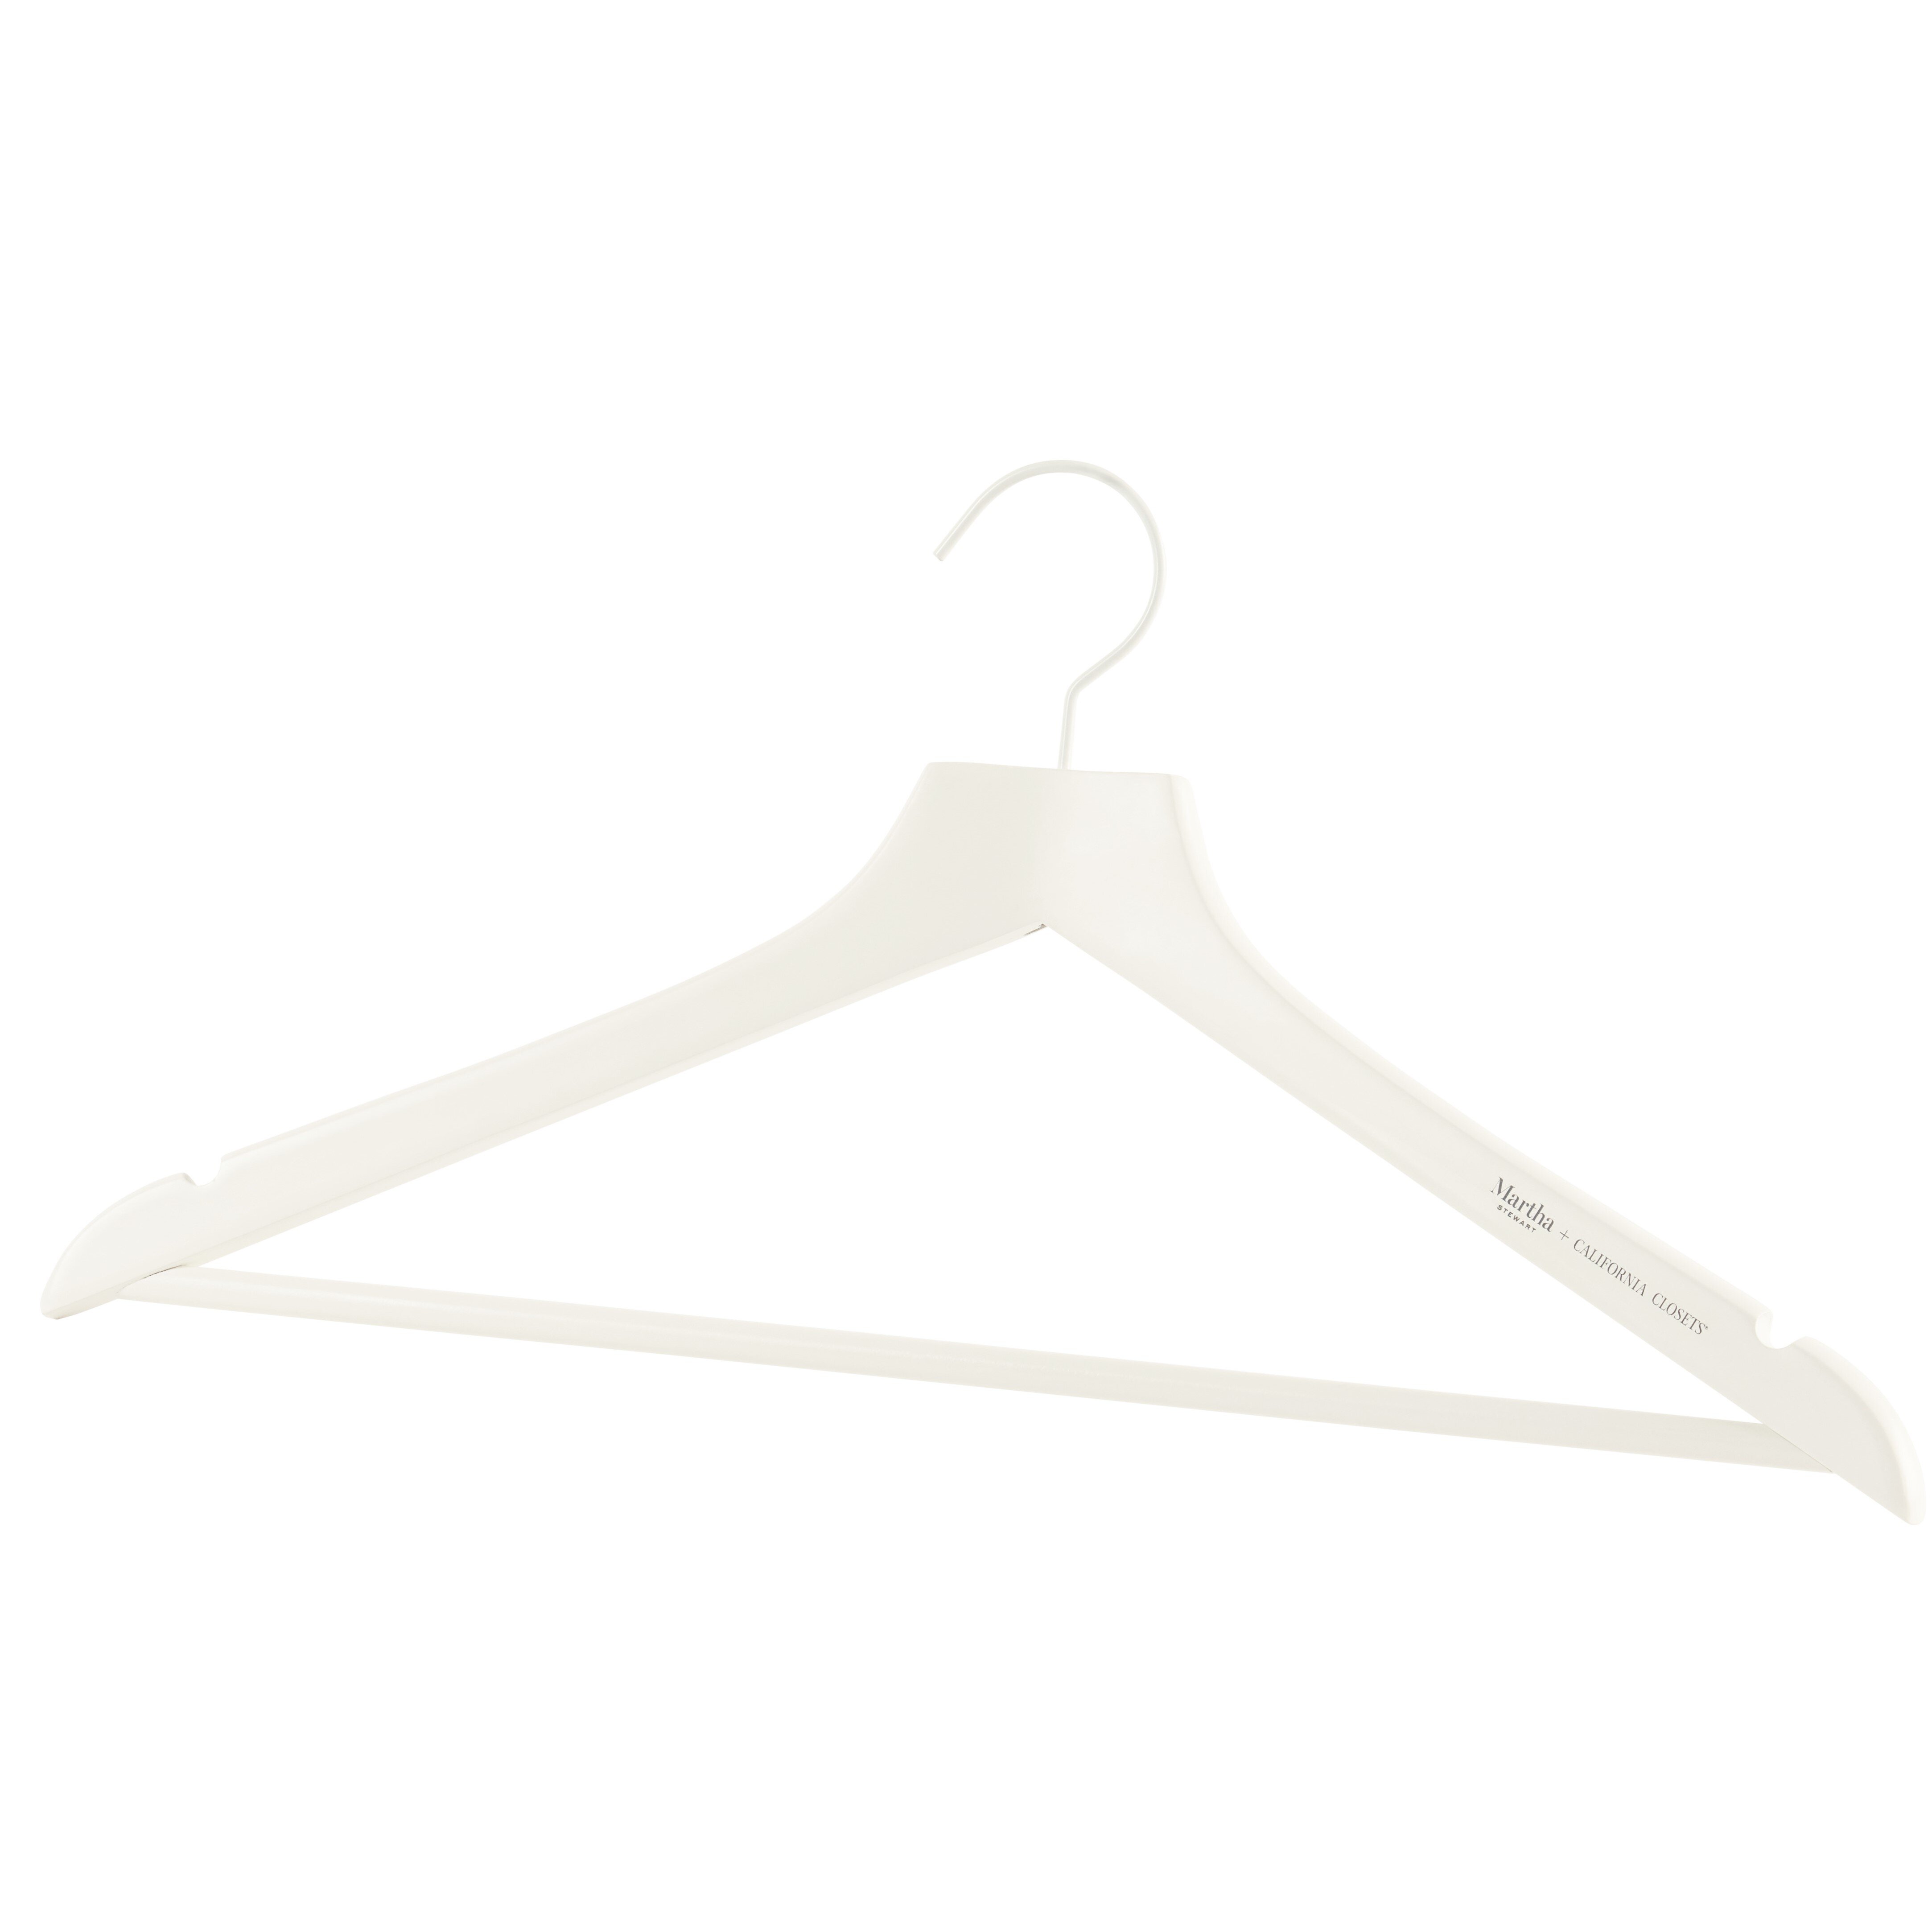 Space Saving Nonslip Suit Hanger - by California Closets